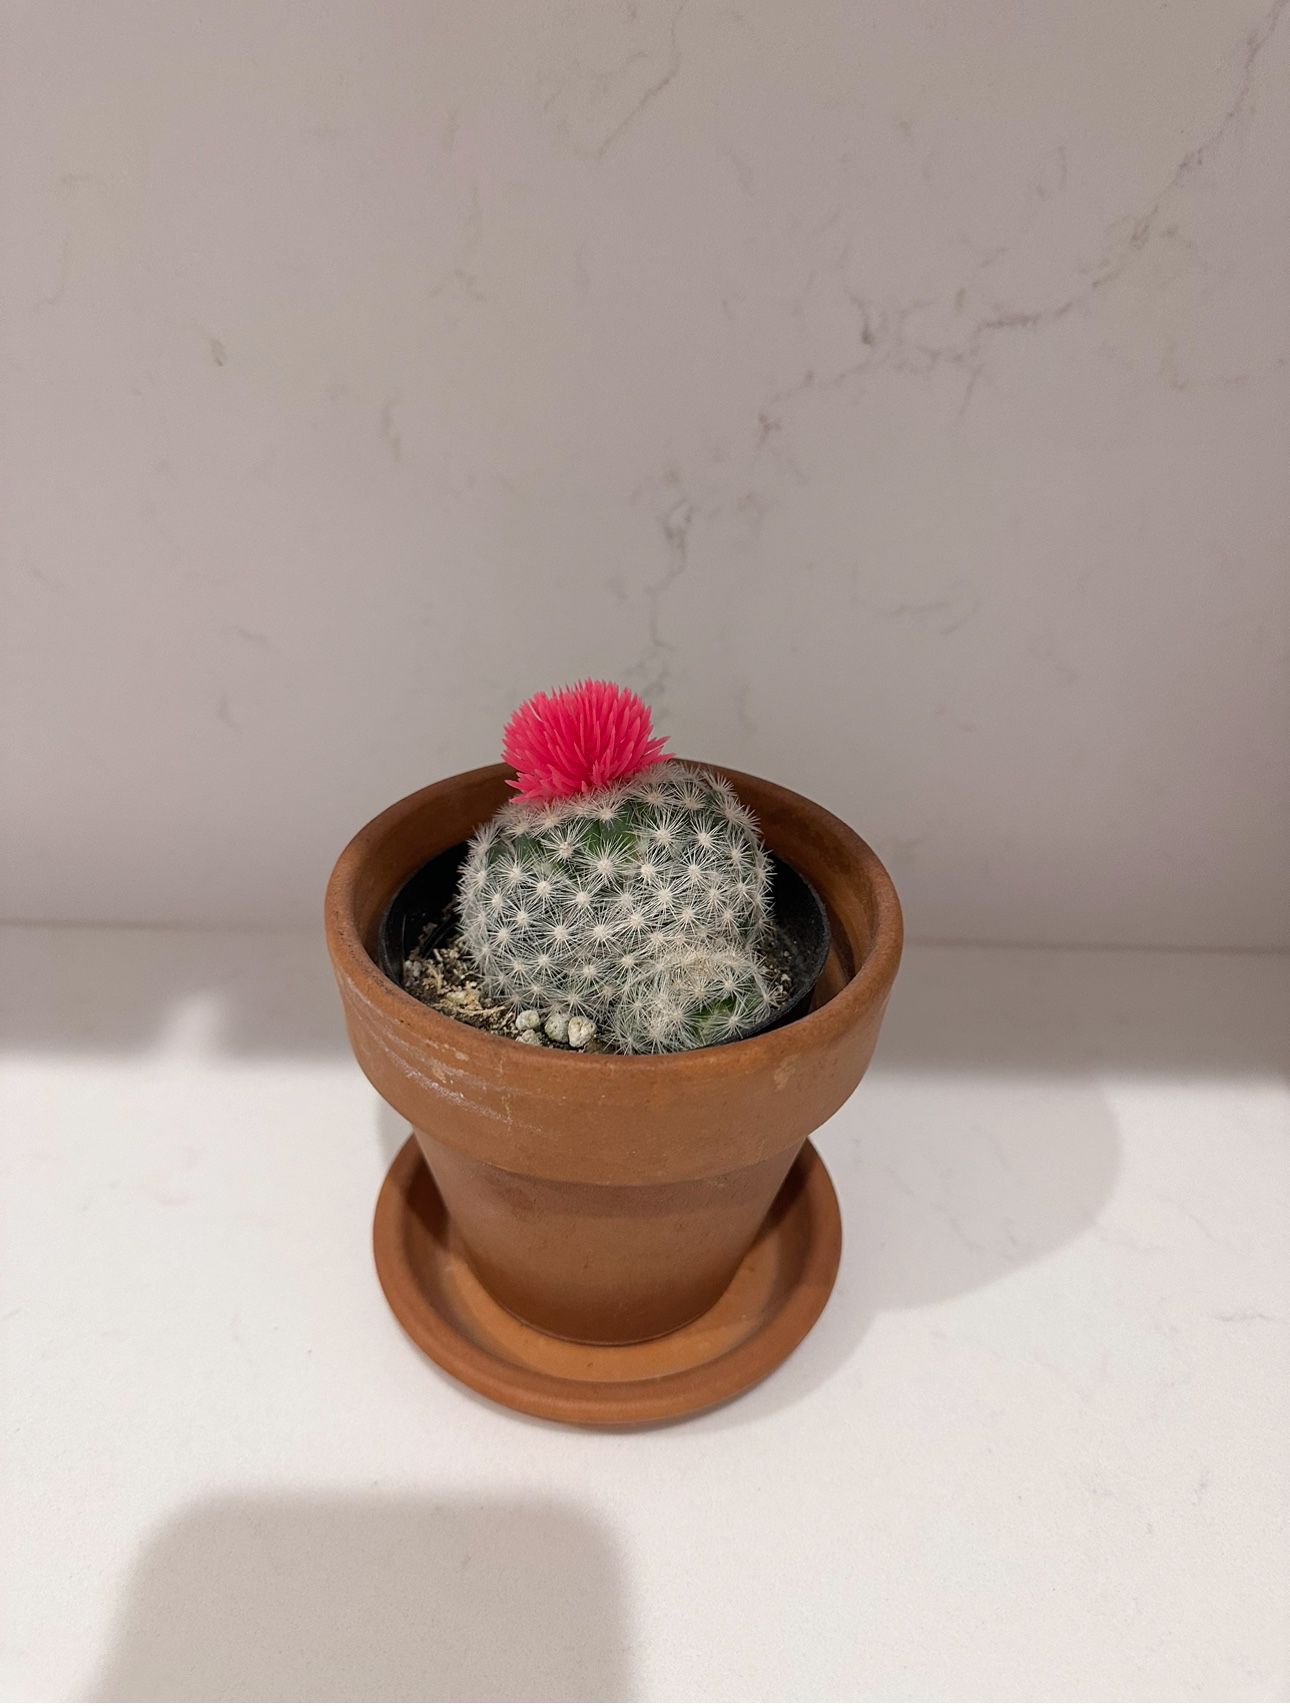 MOUNTAIN BALL CACTUS (PEDIOCACTUS) 🌵 in Terracotta Clay Pot w/ Saucer 🪴 Perf Mother’s Day Gift! 💝